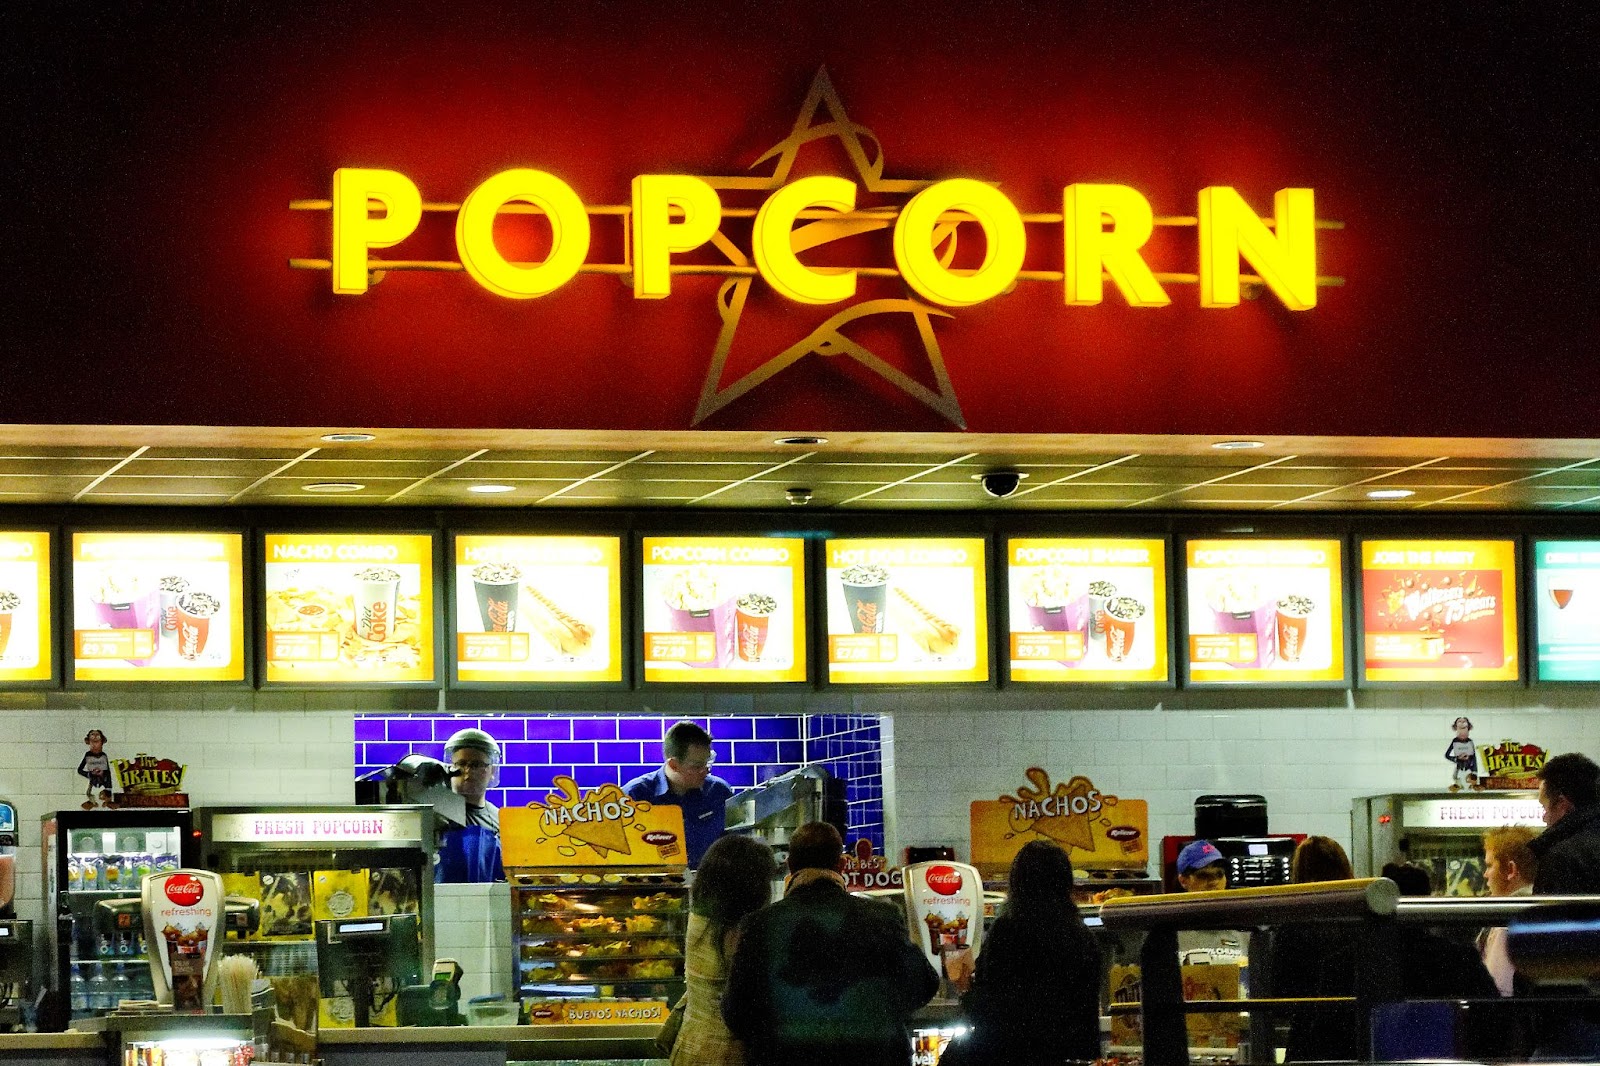 Bright golden 'POPCORN' letters on a red wall above movie theater concession stand; patrons lined up to buy snacks.